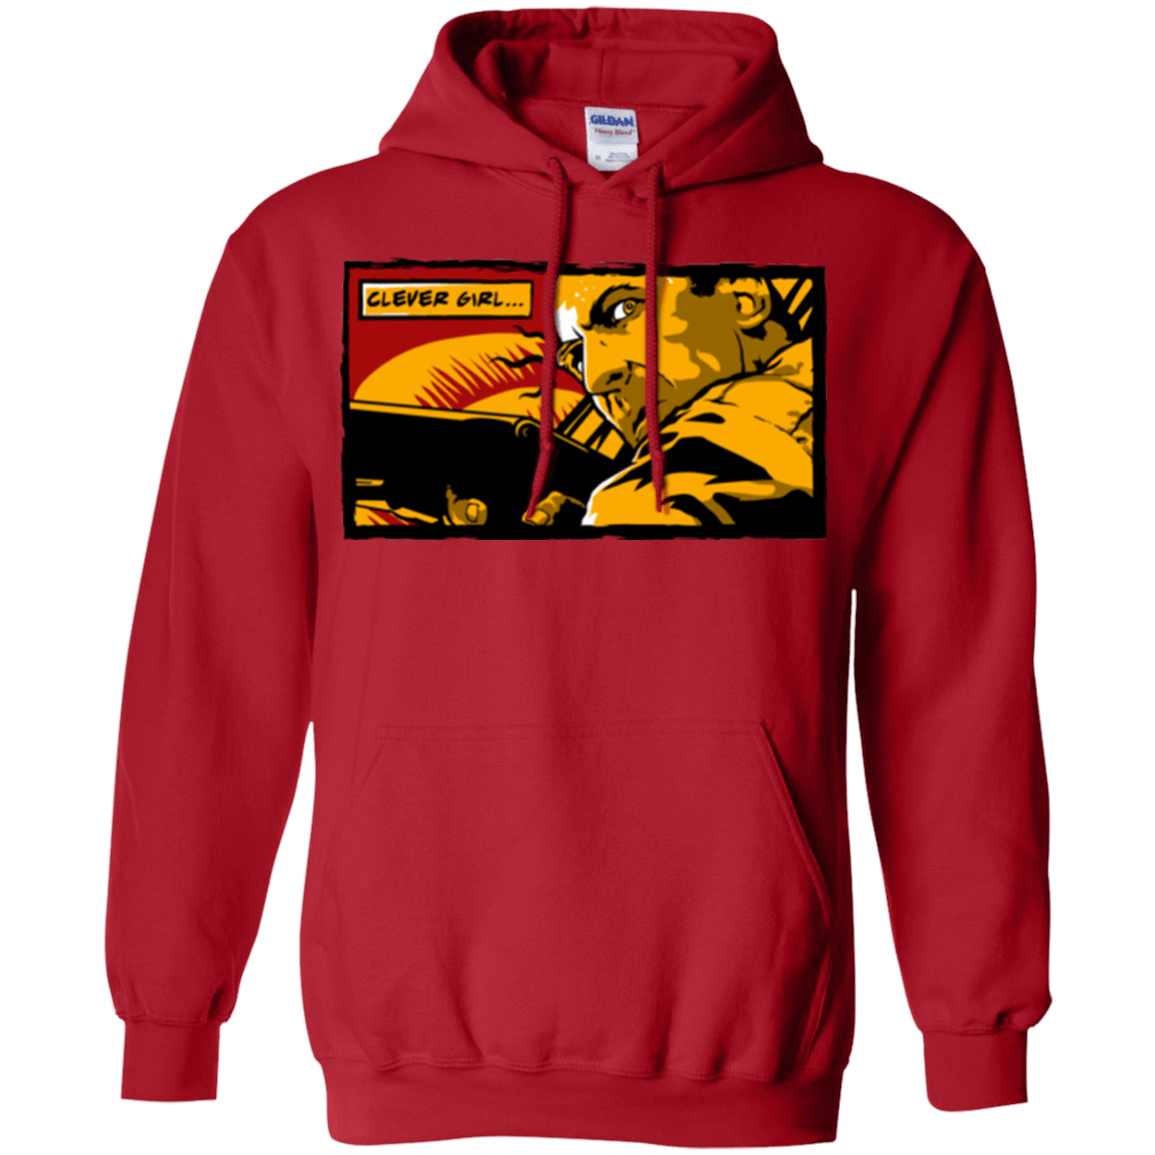 Sweatshirts Red / Small Clever Girl Pullover Hoodie